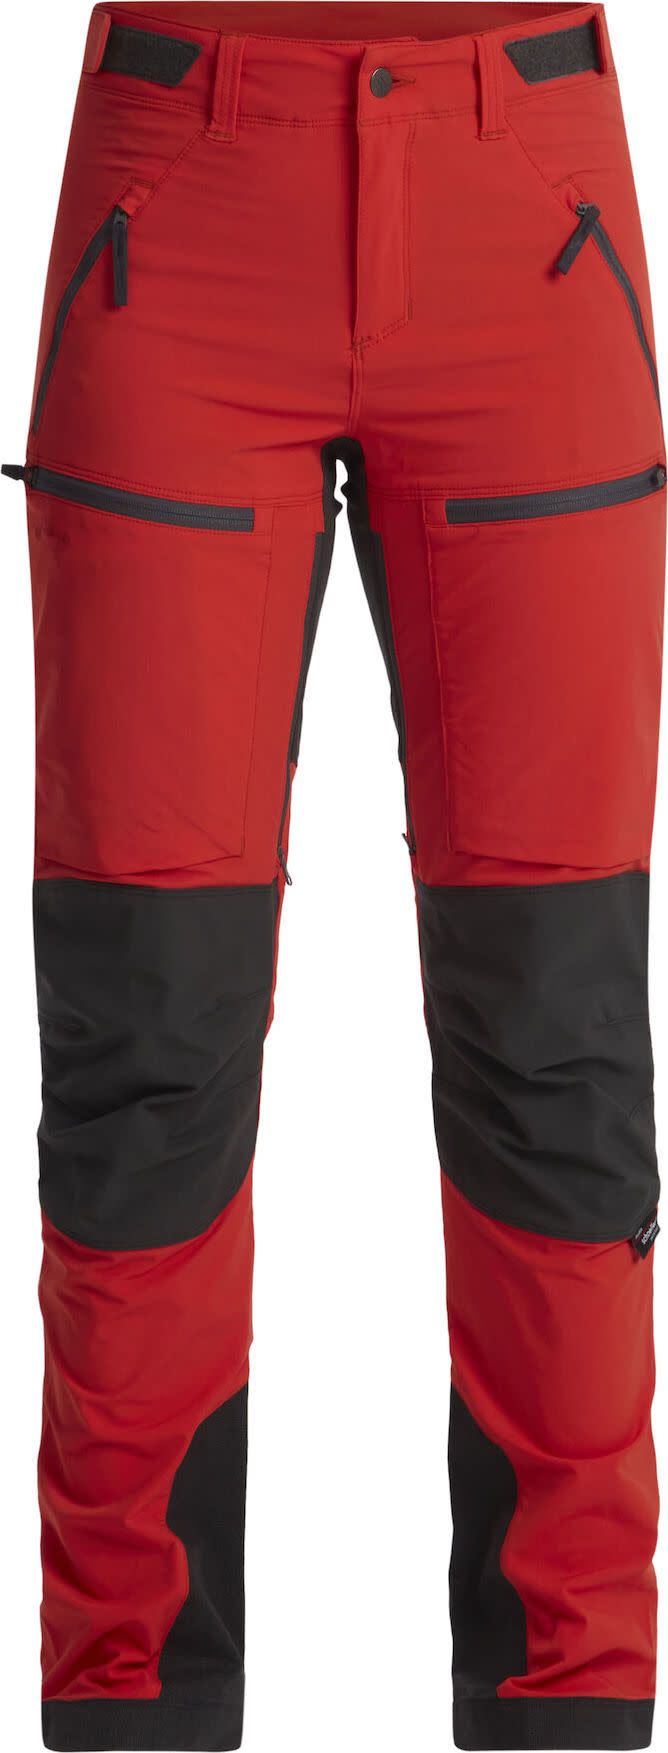 Lundhags Women's Askro Pro Pant Lively Red/Charcoal Lundhags